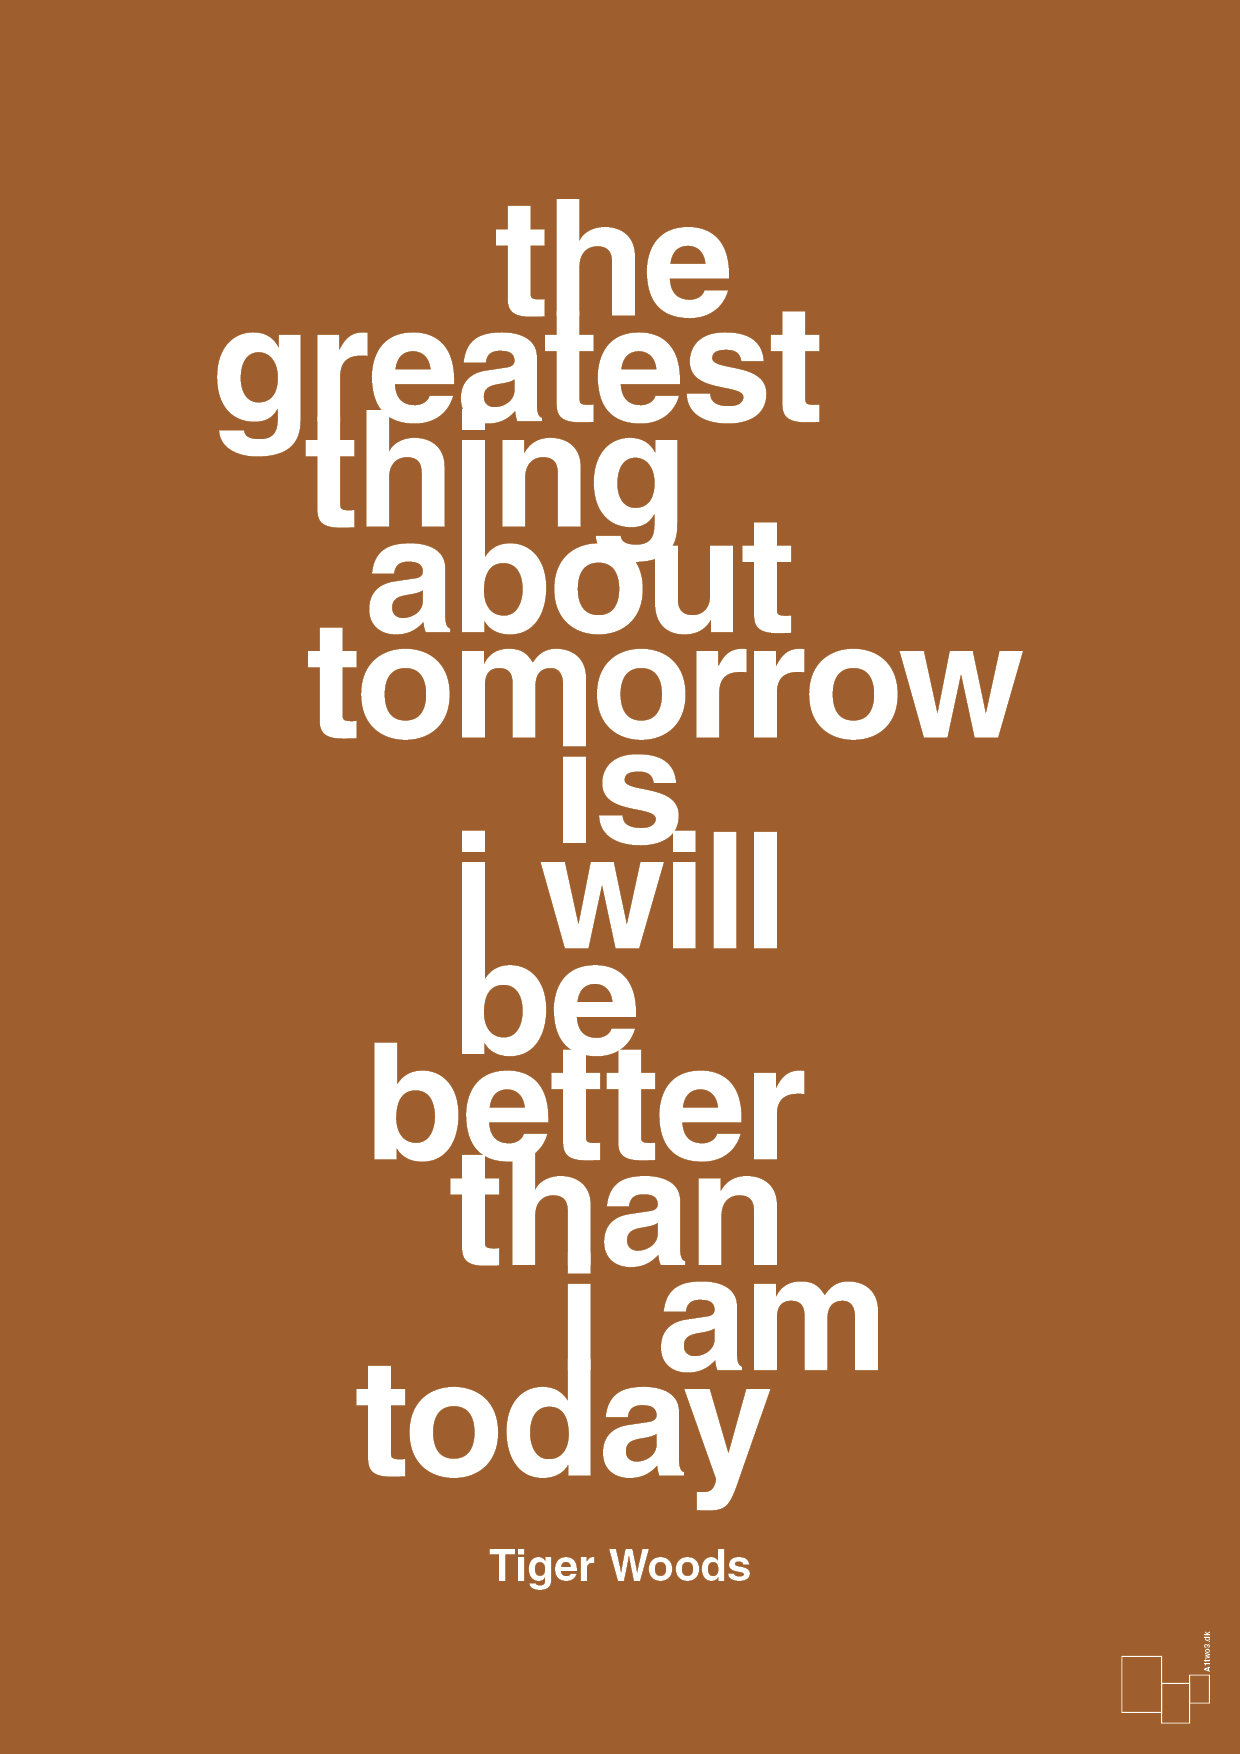 the greatest thing about tomorrow is i will be better than i am today - Plakat med Citater i Cognac